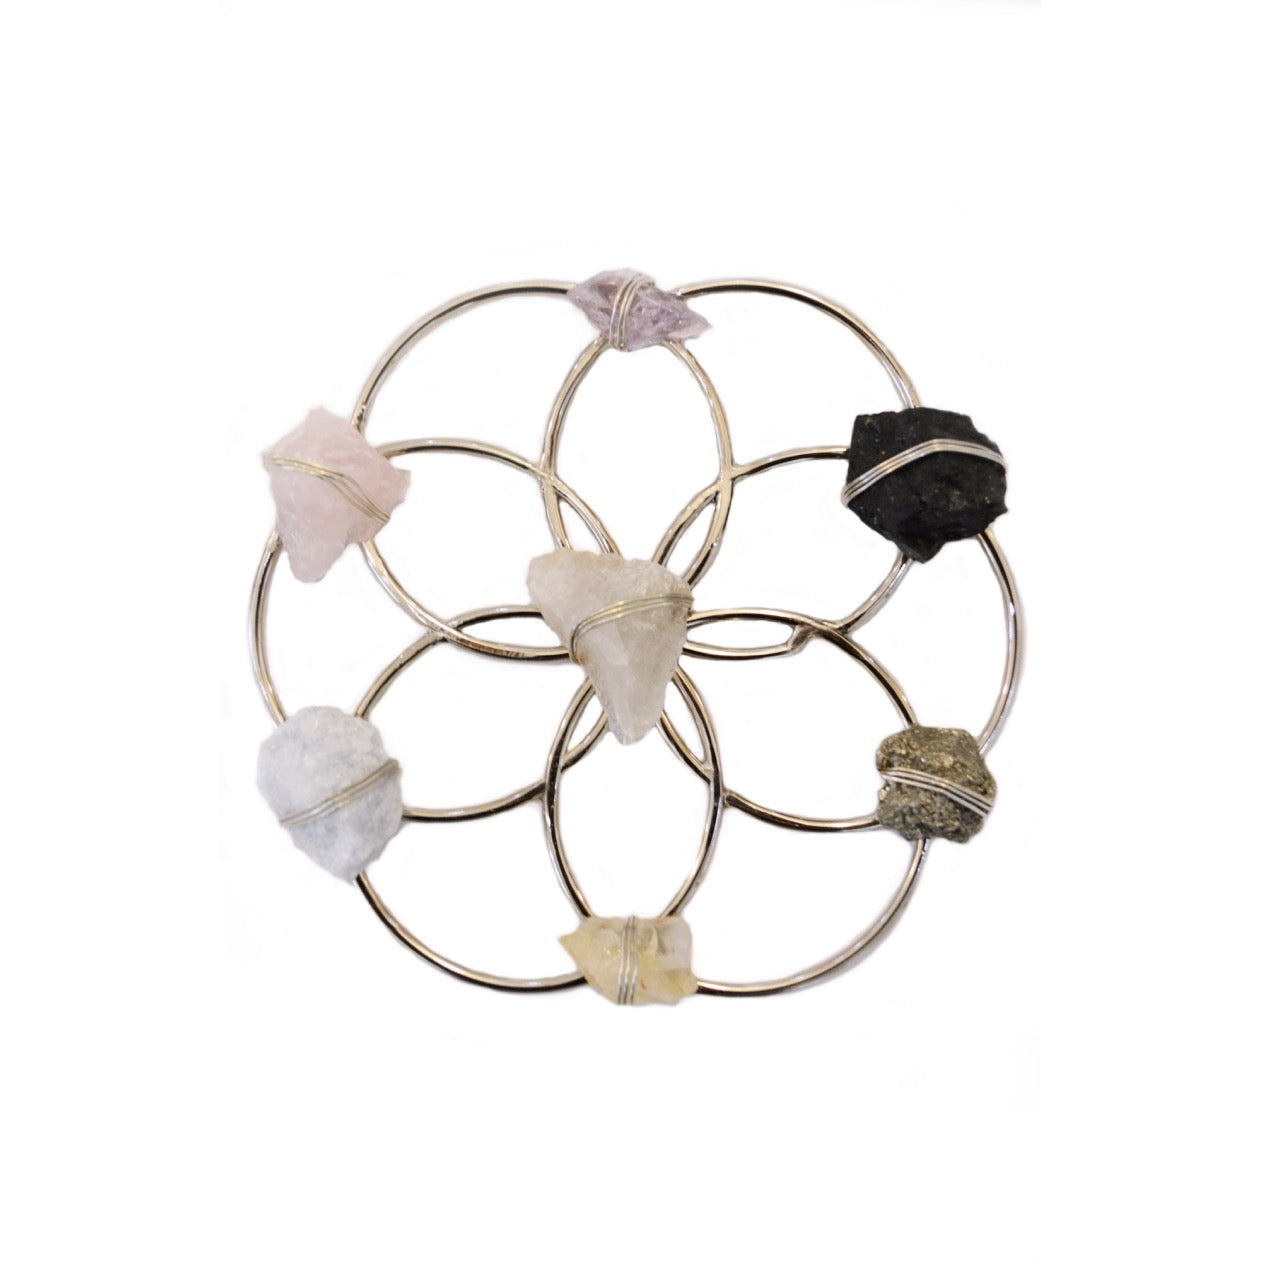 Small Flower of Life Healing Crystal Grid - Silver by Ariana Ost